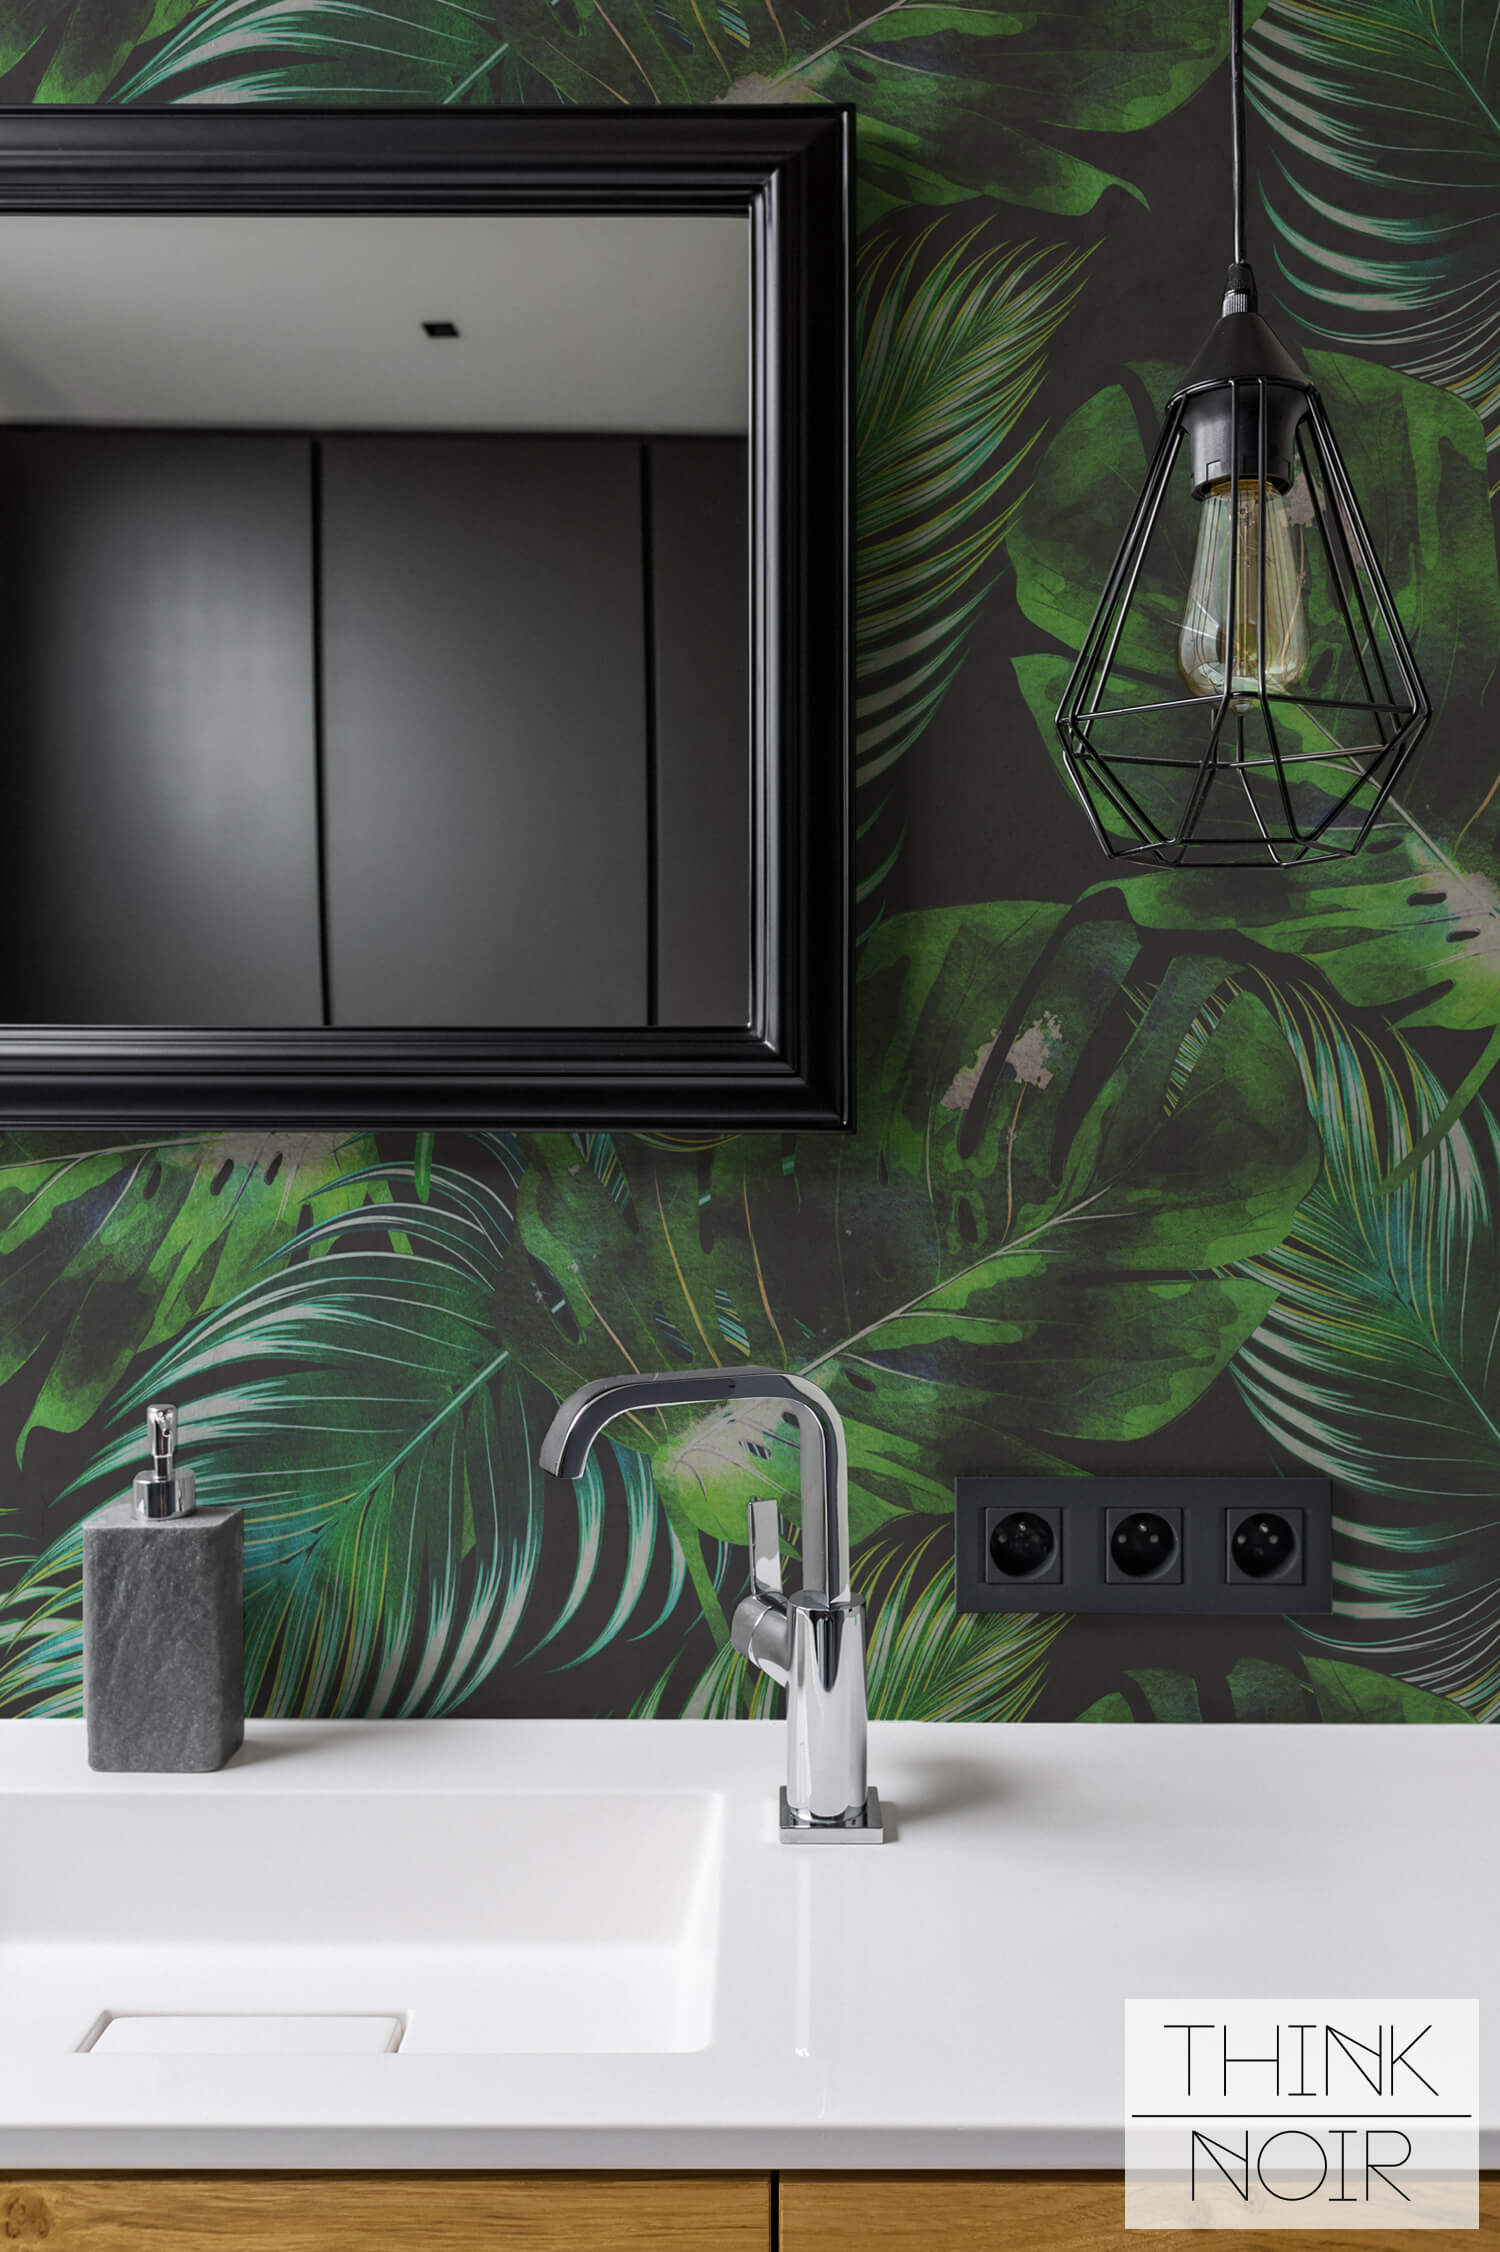 Give Your Bathroom The Makeover It Deserves Suitable Wallpaper Blog